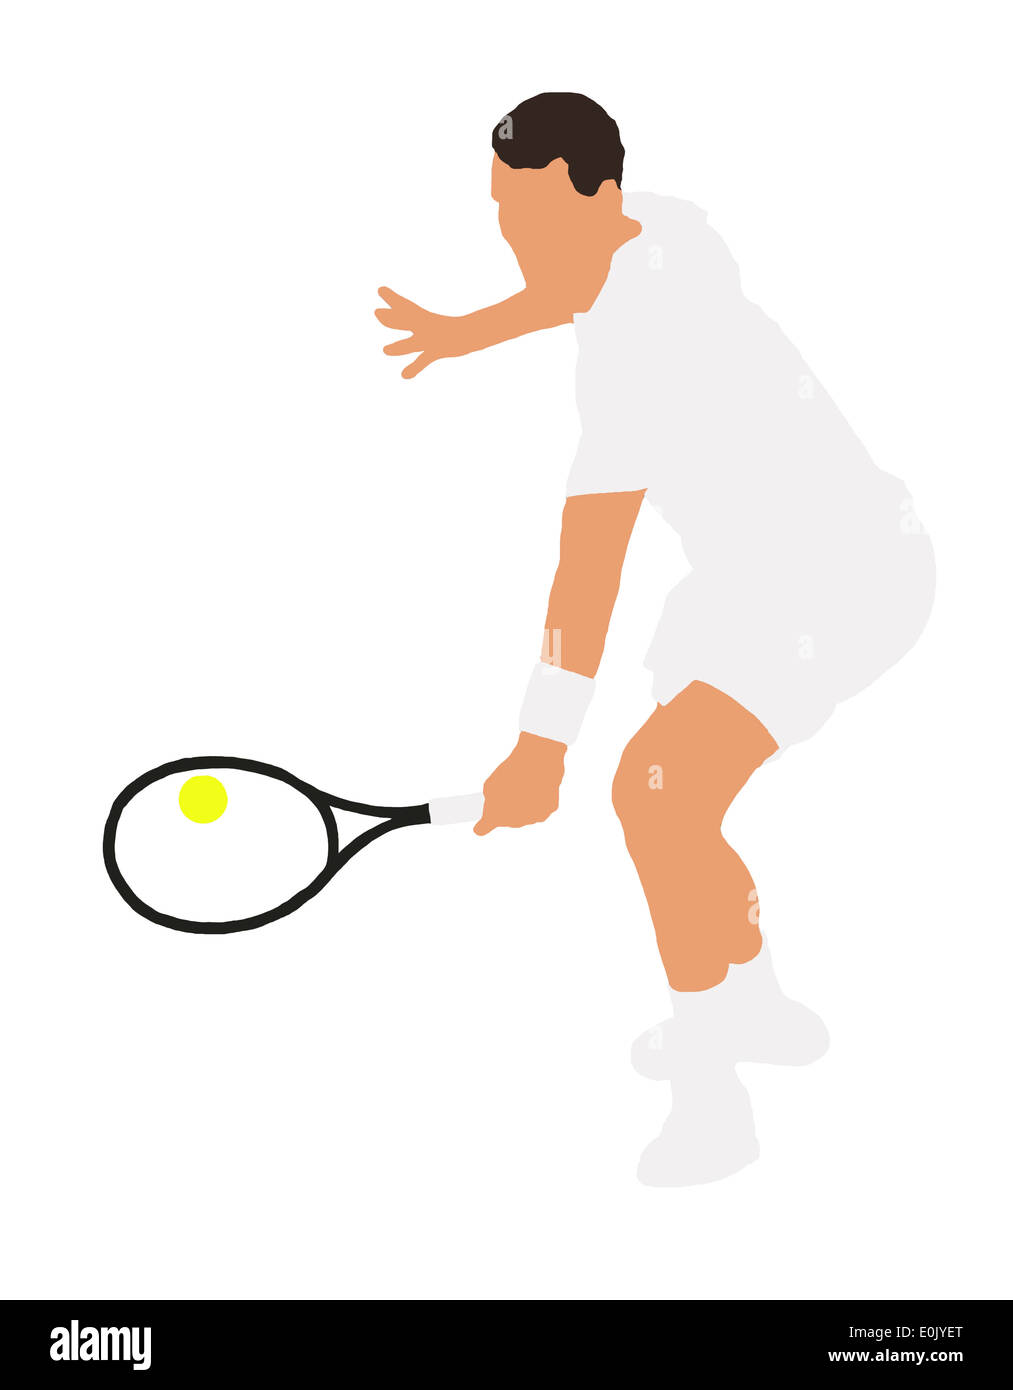 Male tennis player playing a backhand volley Stock Photo - Alamy